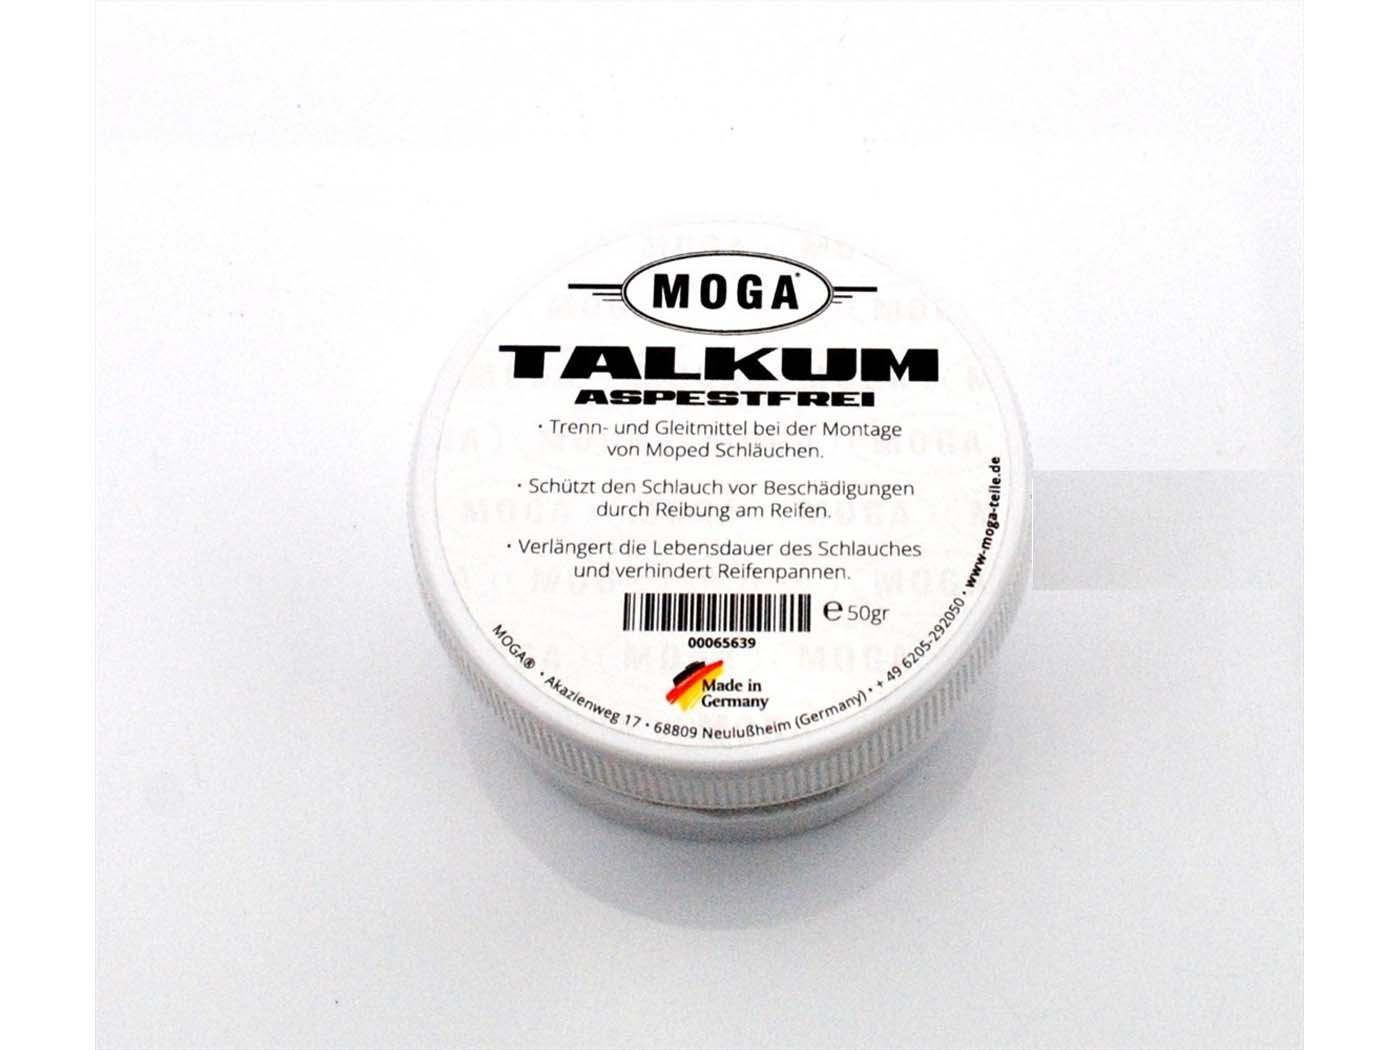 Tire Tube Assembly Talcum 50gr. For Moped Moped Mokick Motorcycle Scooter MOGA